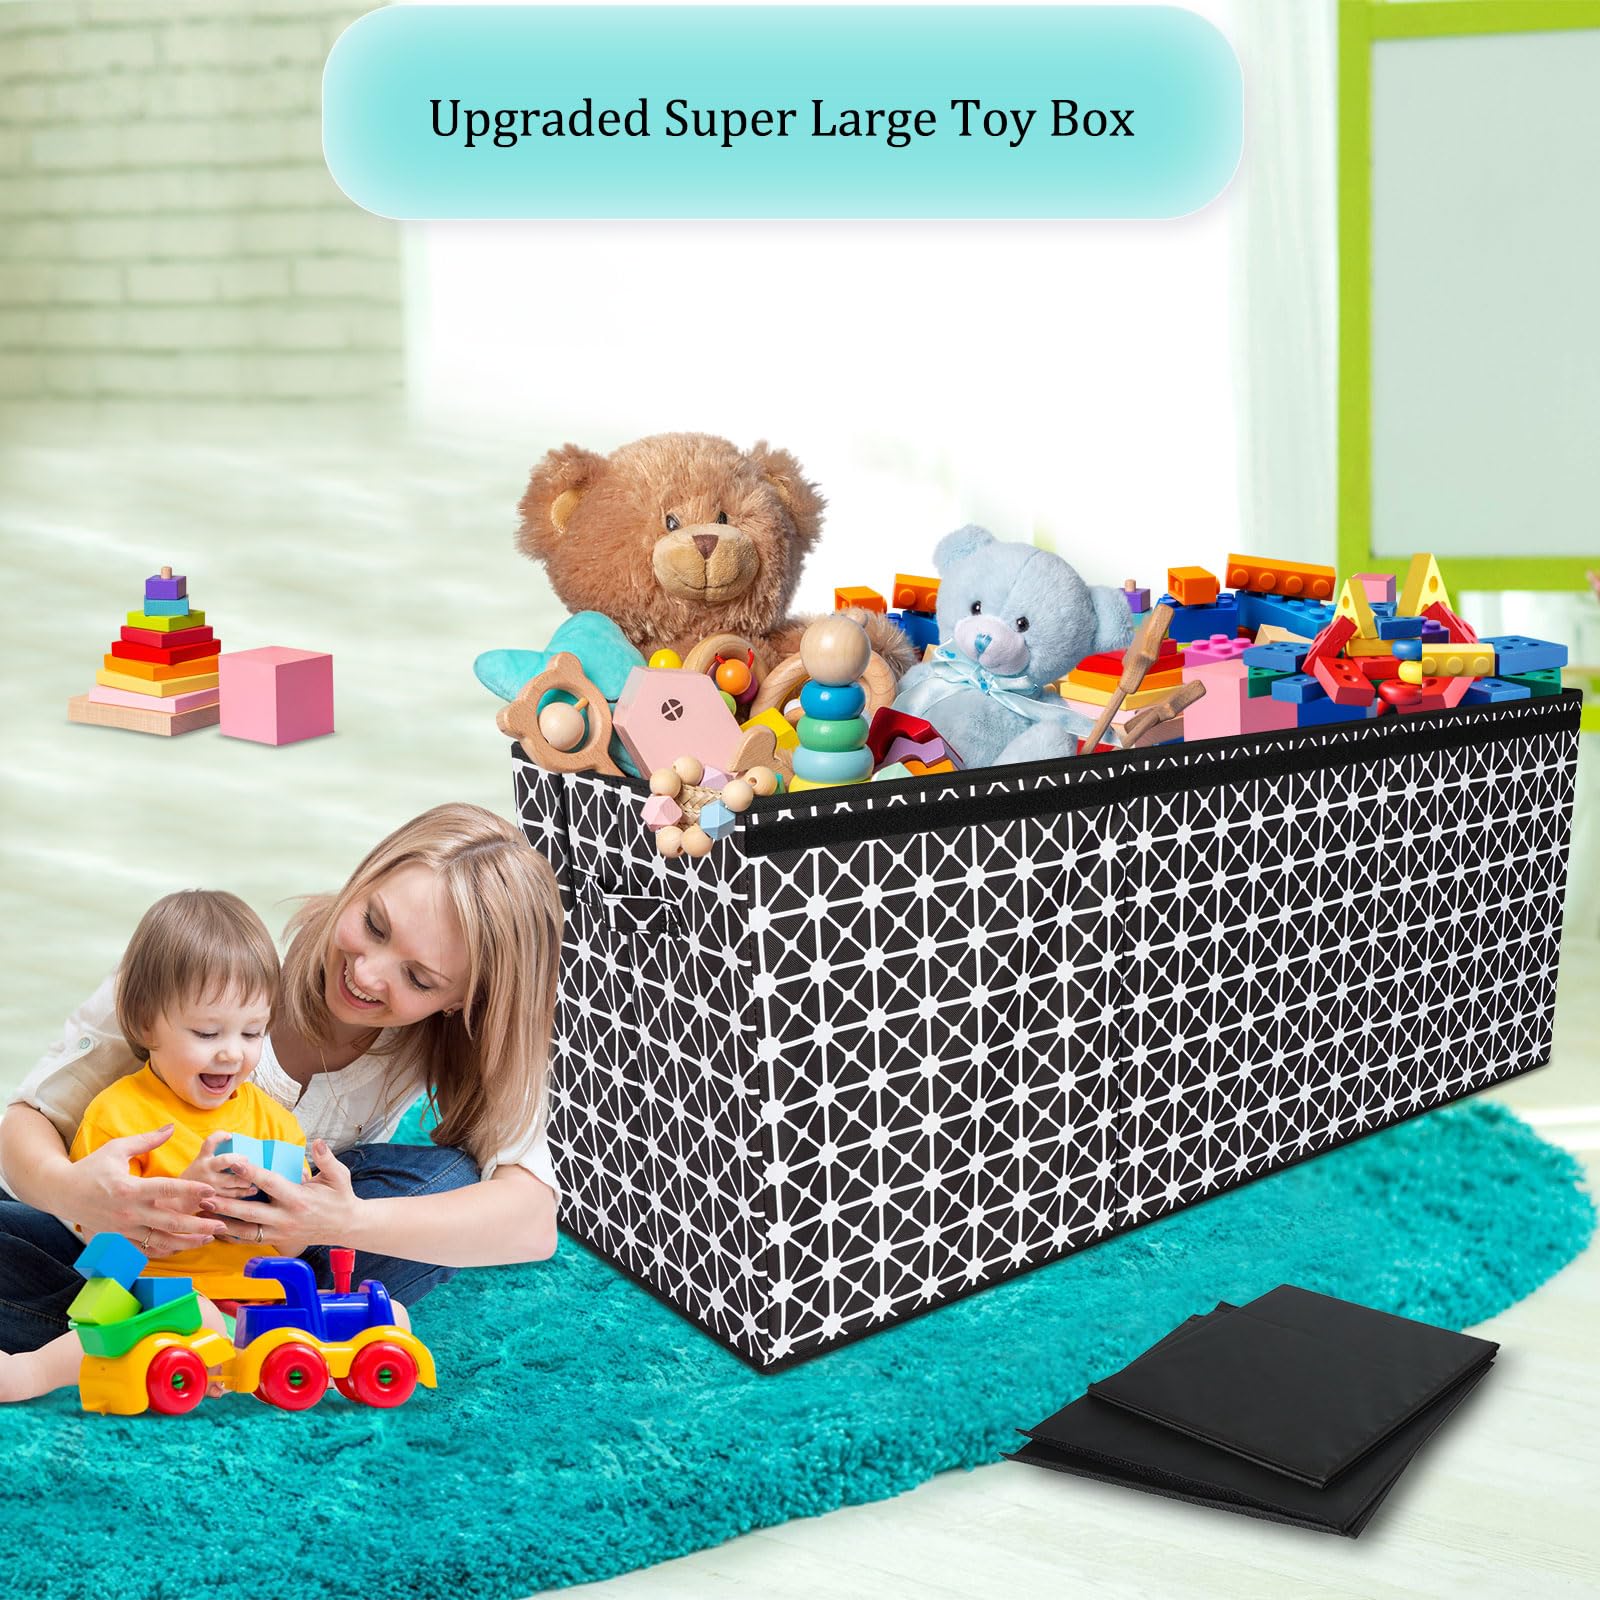 Vilucks Large Toy Box Chest, Toy Chest for Boys, Collapsible Sturdy Toy Storage Organizer with Lid, Foldable Boxes Bins Baskets for Kids, Boys, Girls, Nursery, Playroom, Closet (Dinosaur)